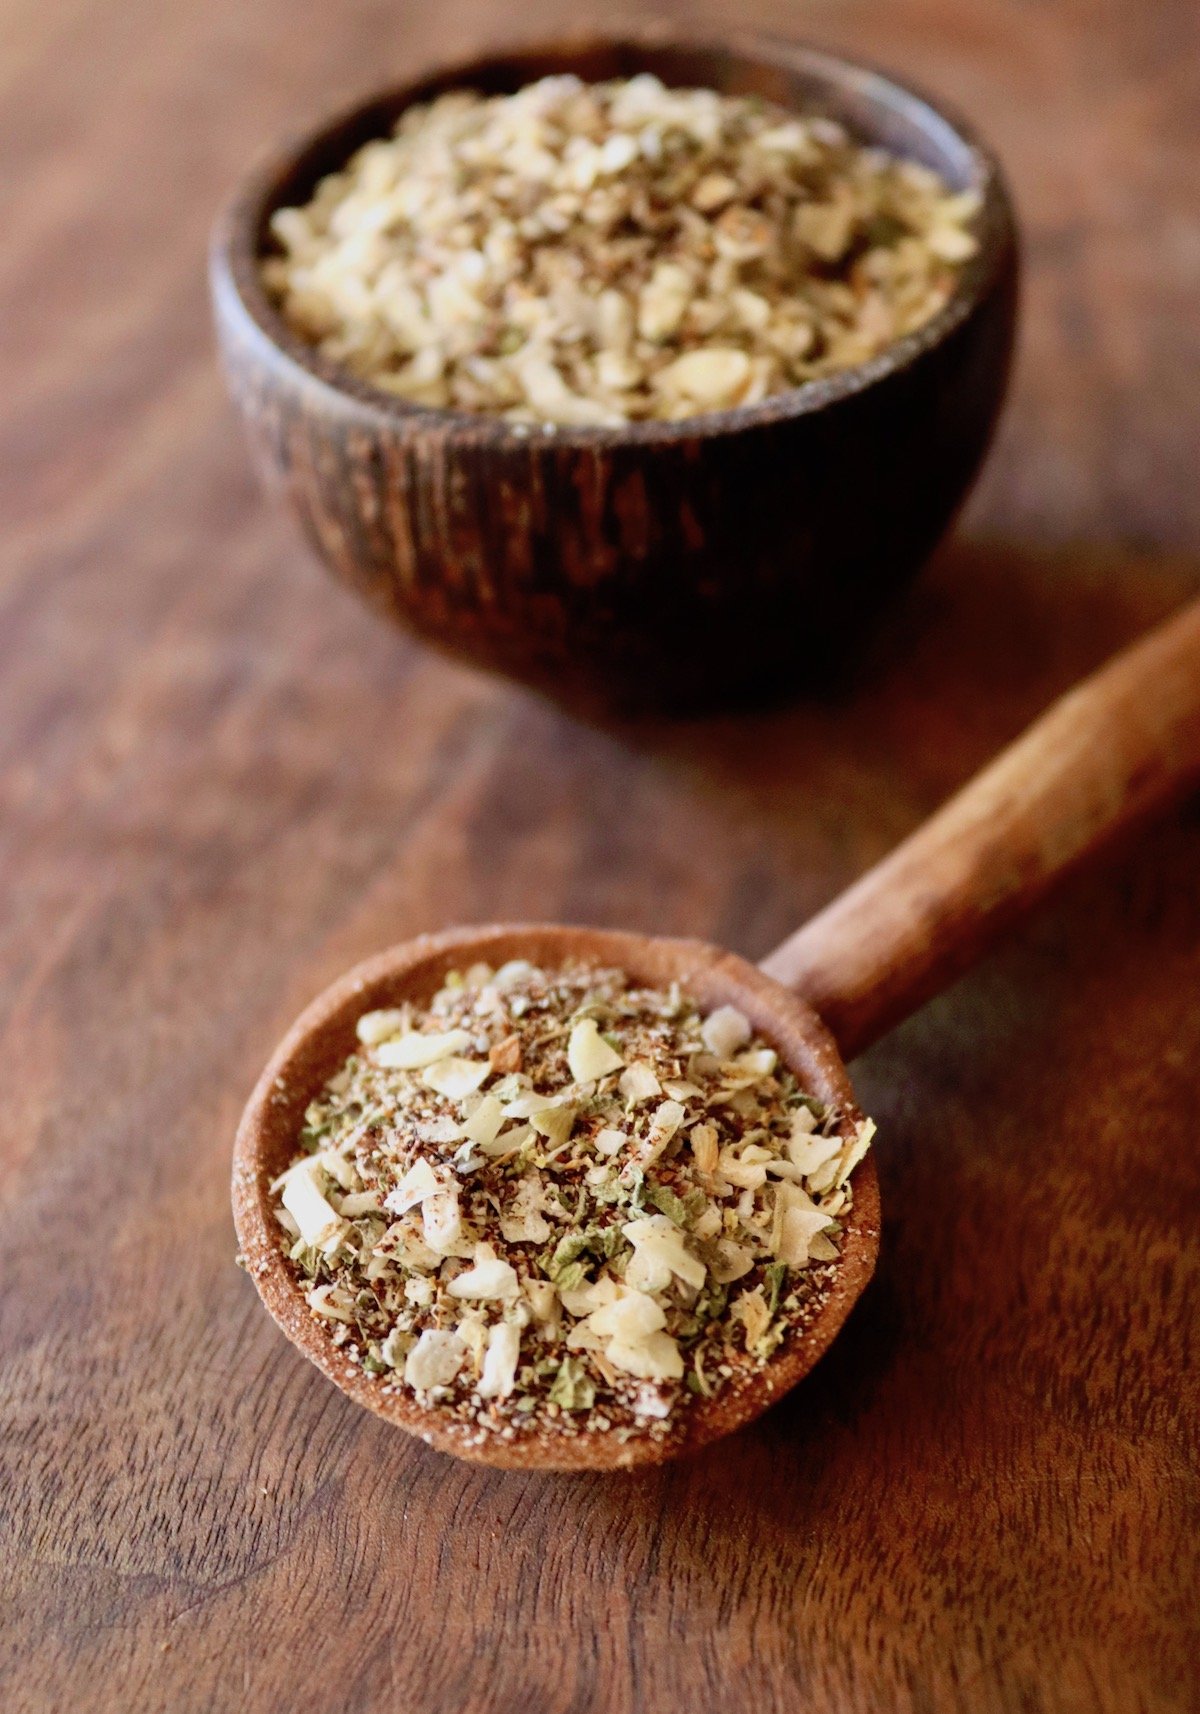 Dried spice mix of garlic, onion, chili and oregano in a wooden spoon on wood surface.